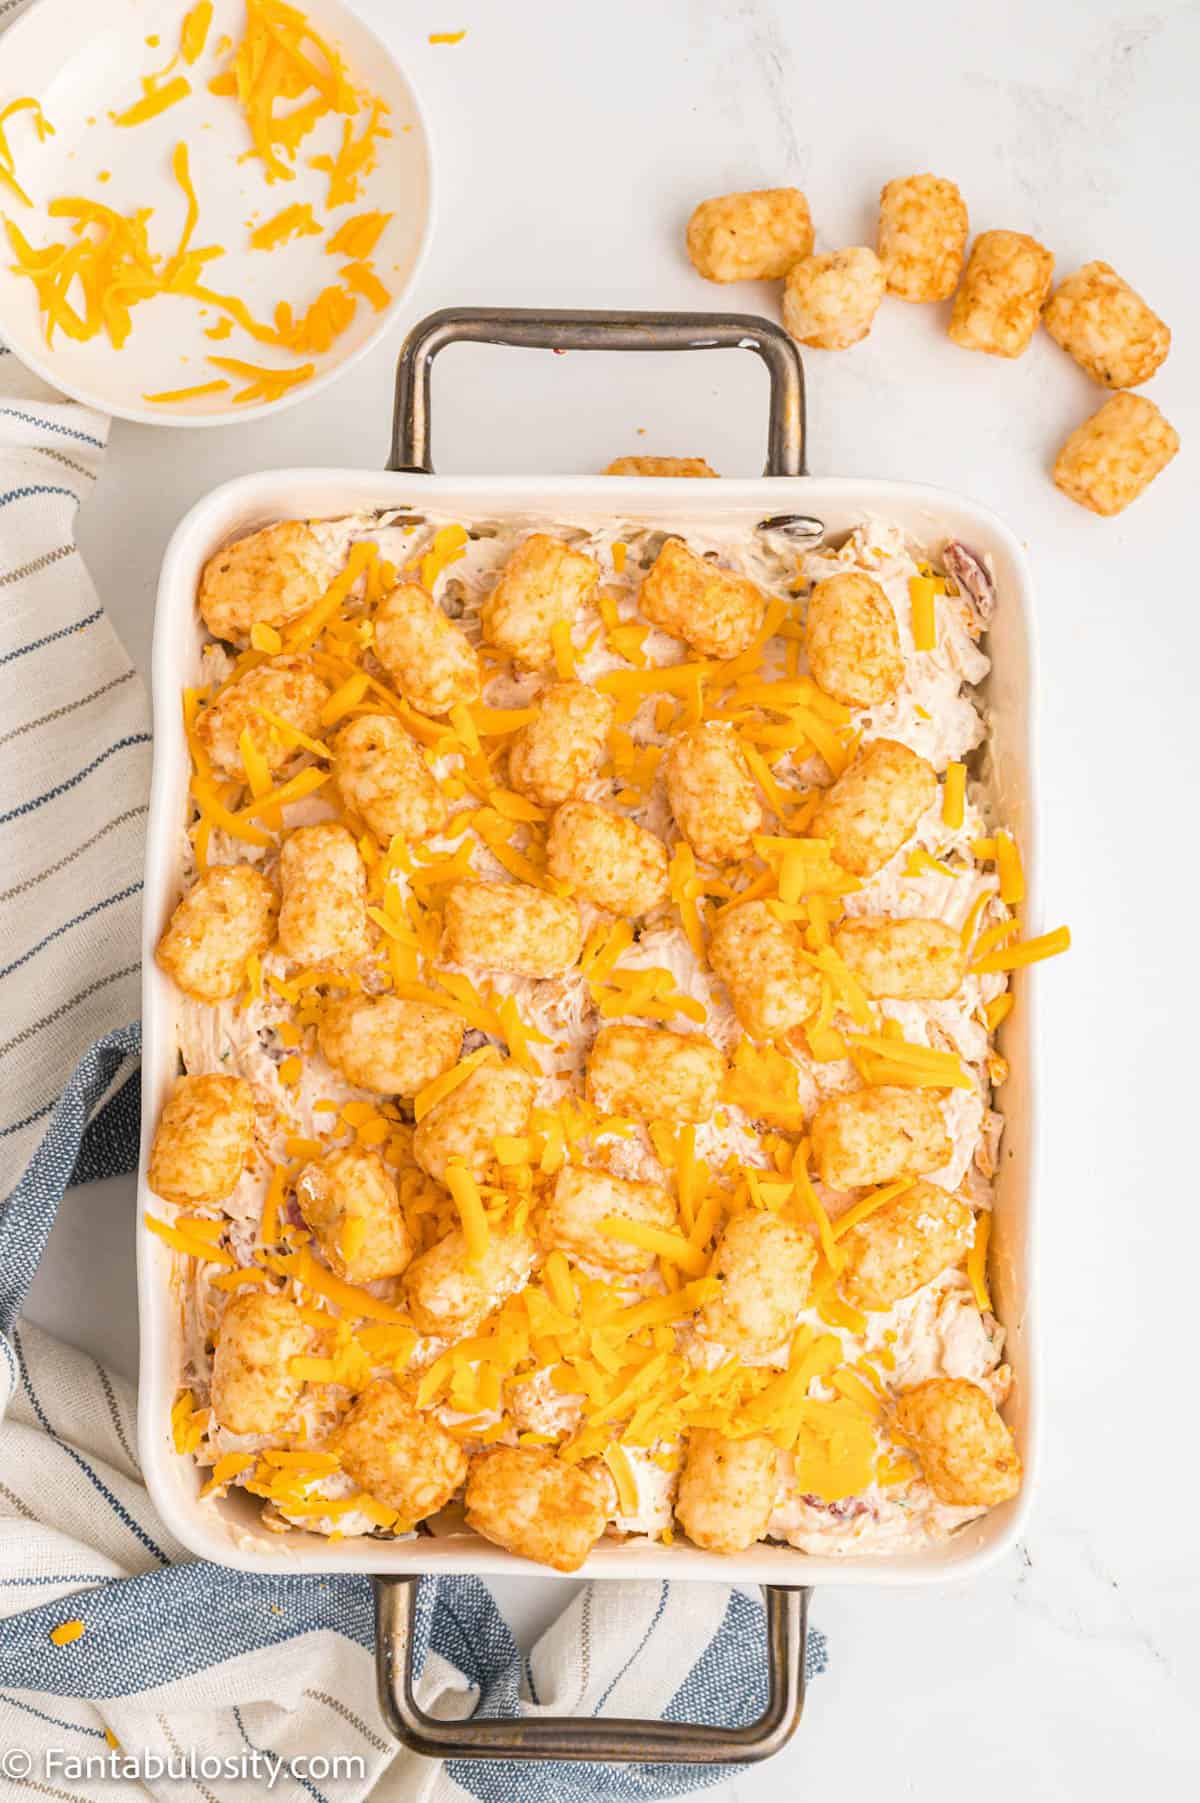 In a white baking dish, frozen tater tots top the unbaked cheesy chicken filling of a comforting casserole